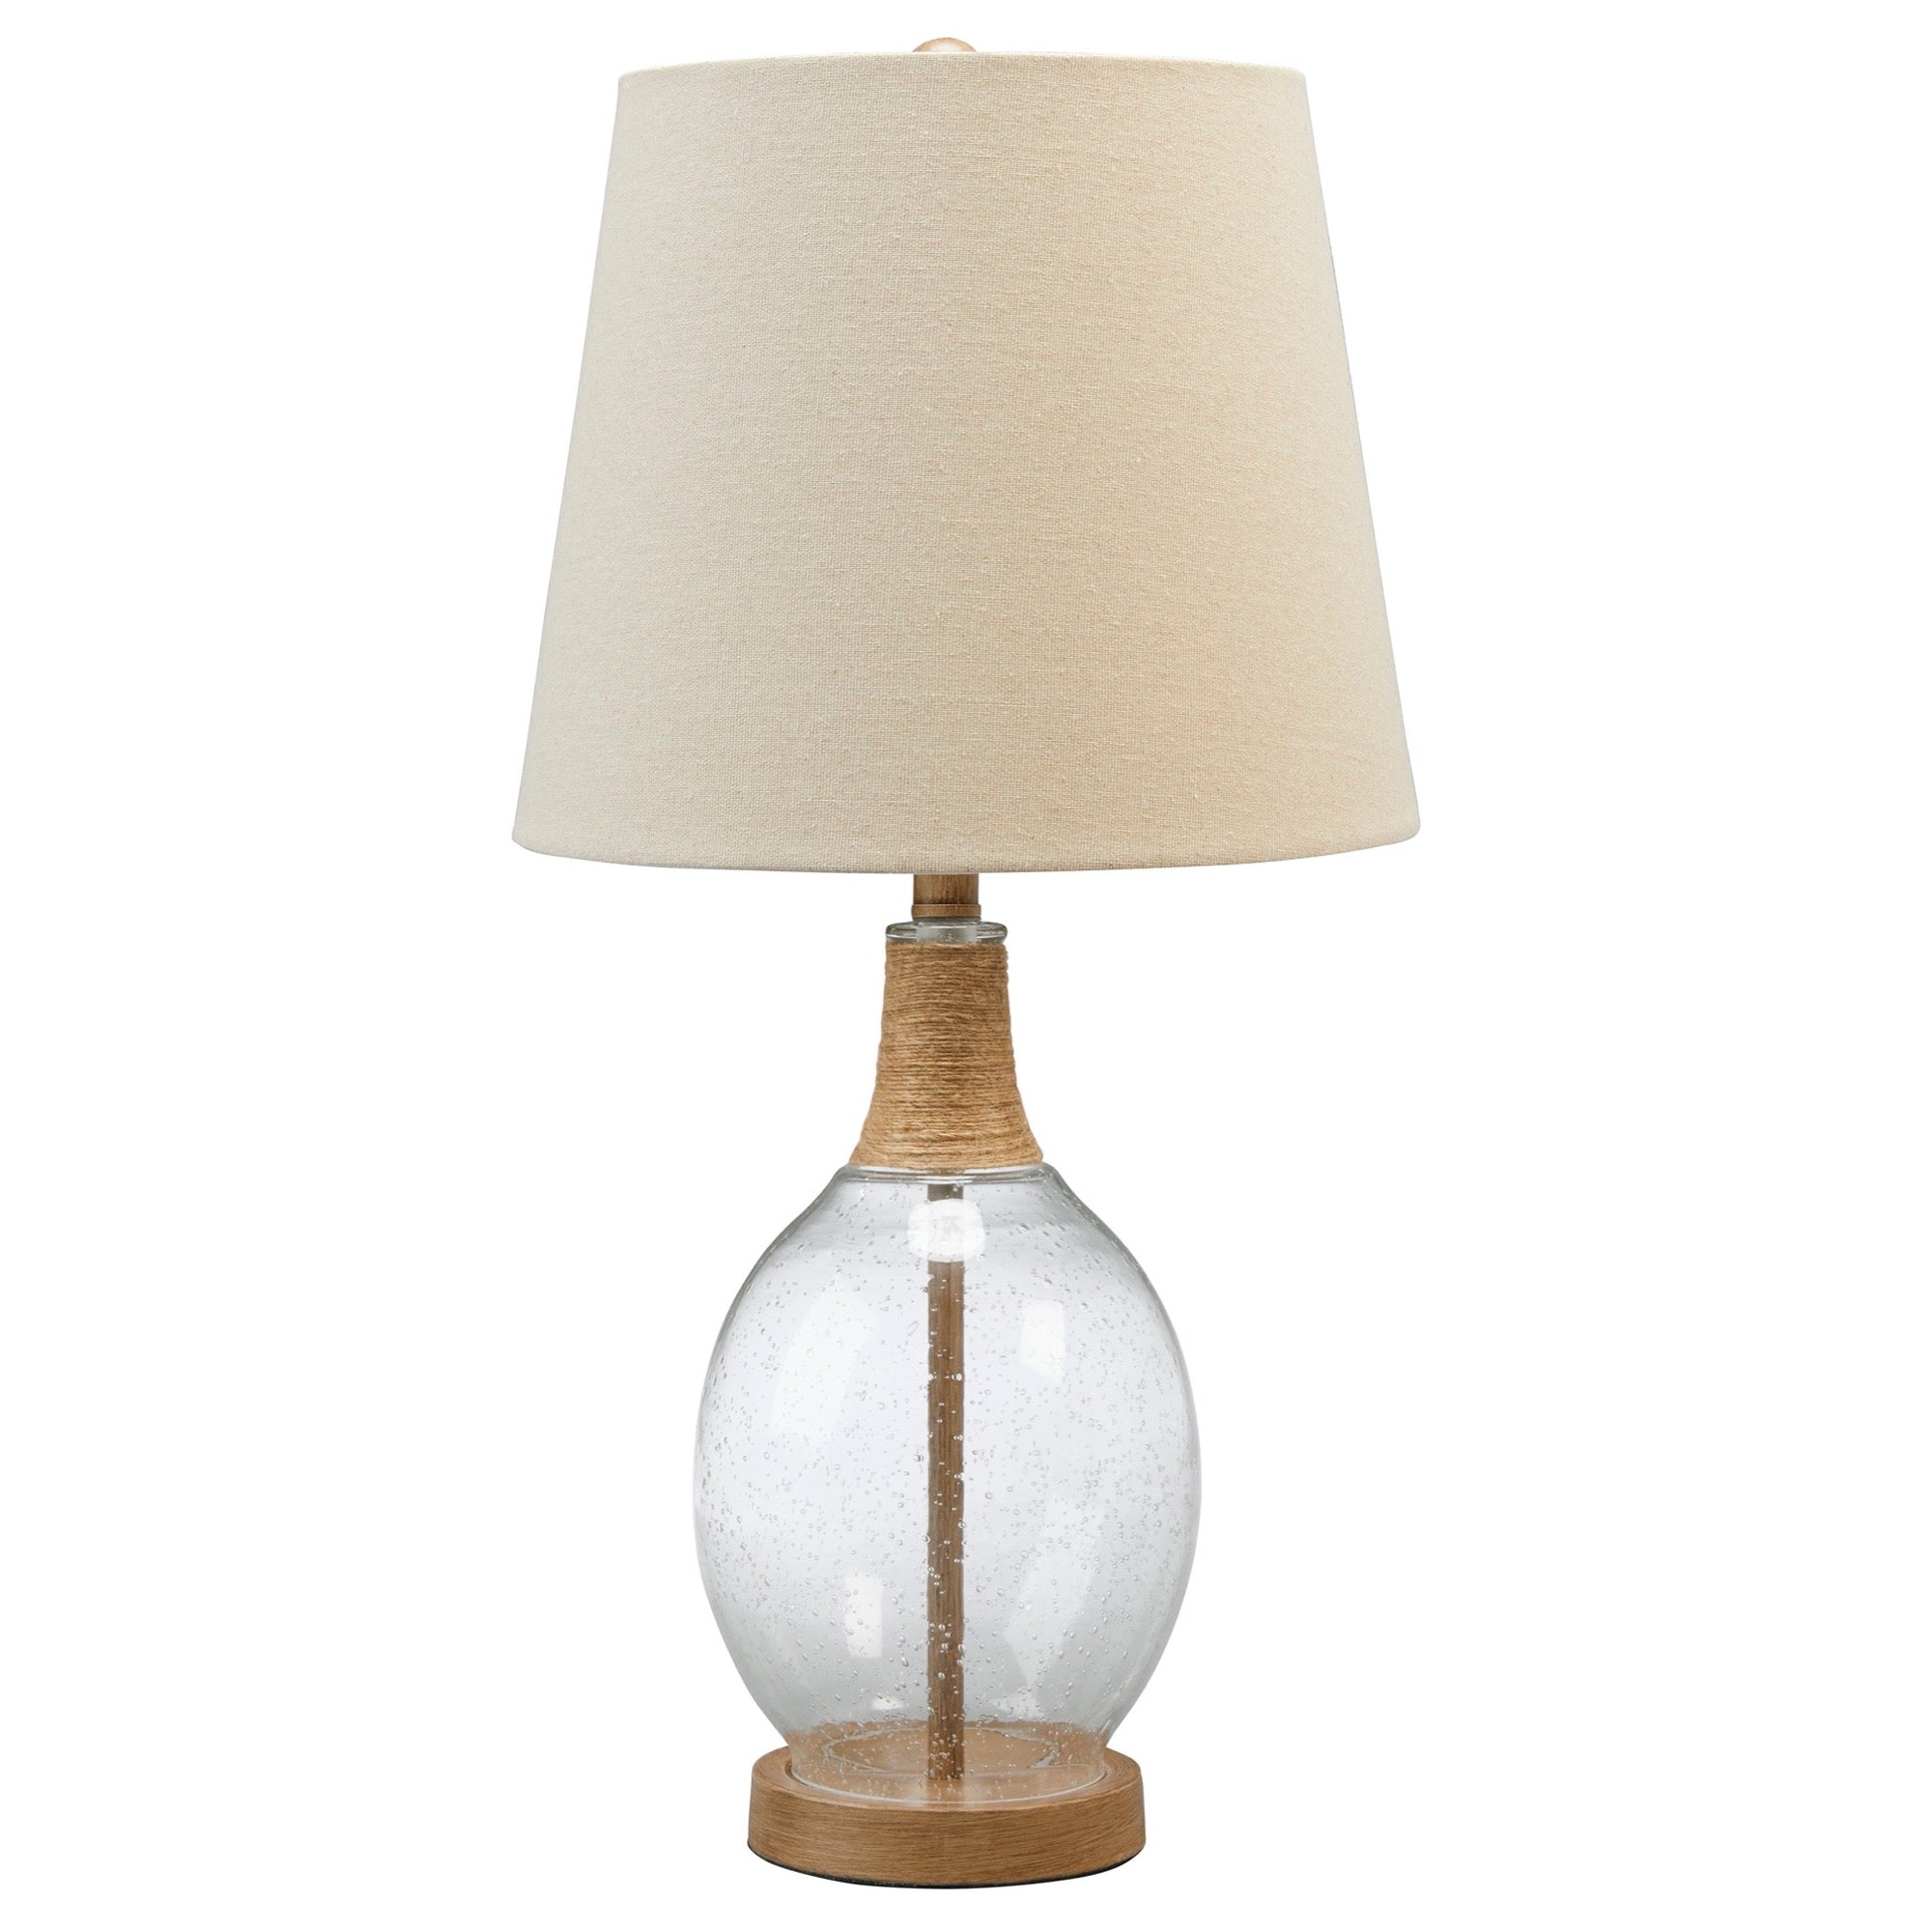 Clayleigh Table Lamp (Set of 2)